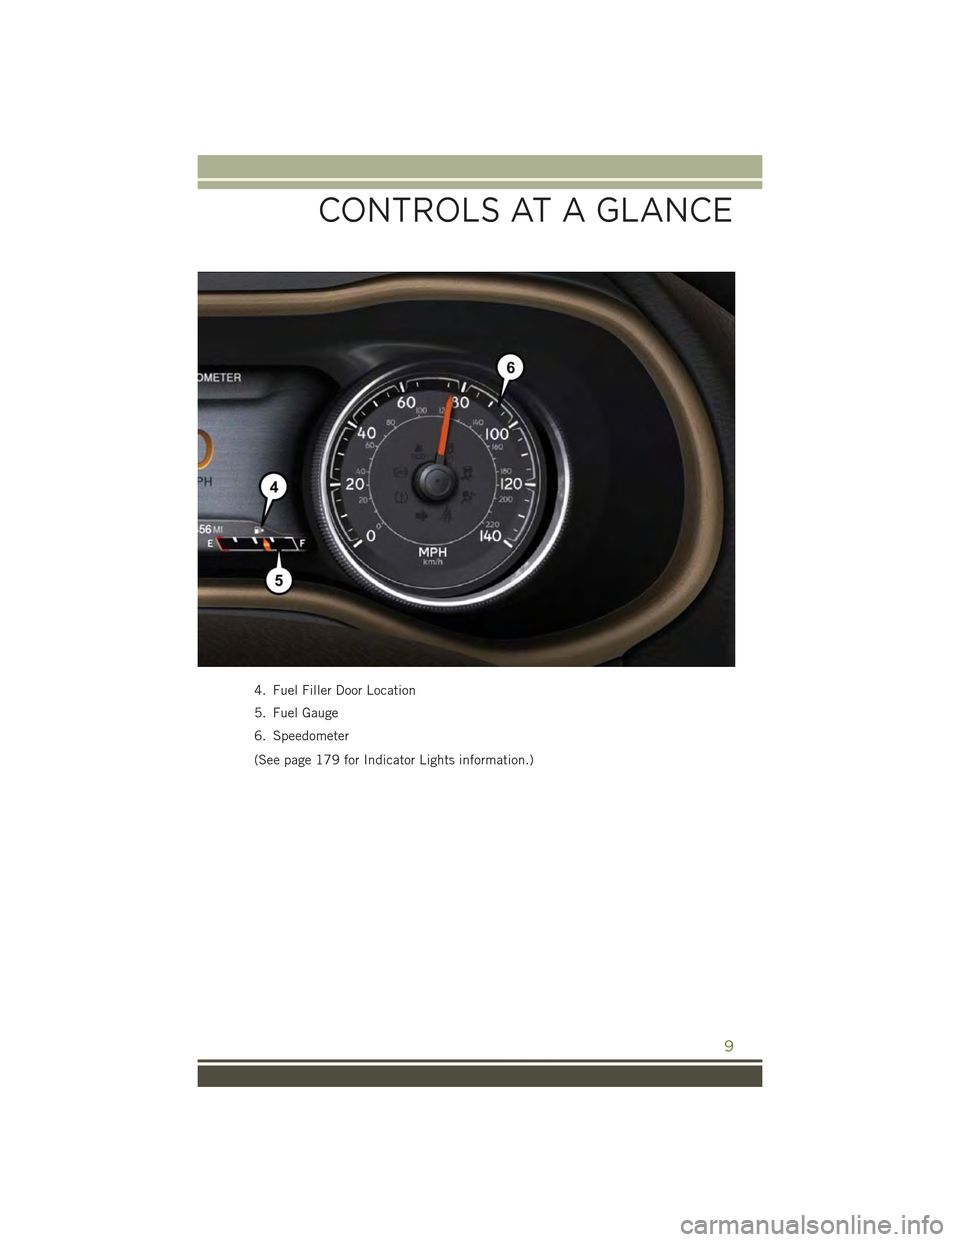 JEEP CHEROKEE 2015 KL / 5.G Owners Manual 4. Fuel Filler Door Location
5. Fuel Gauge
6. Speedometer
(See page 179 for Indicator Lights information.)
CONTROLS AT A GLANCE
9 